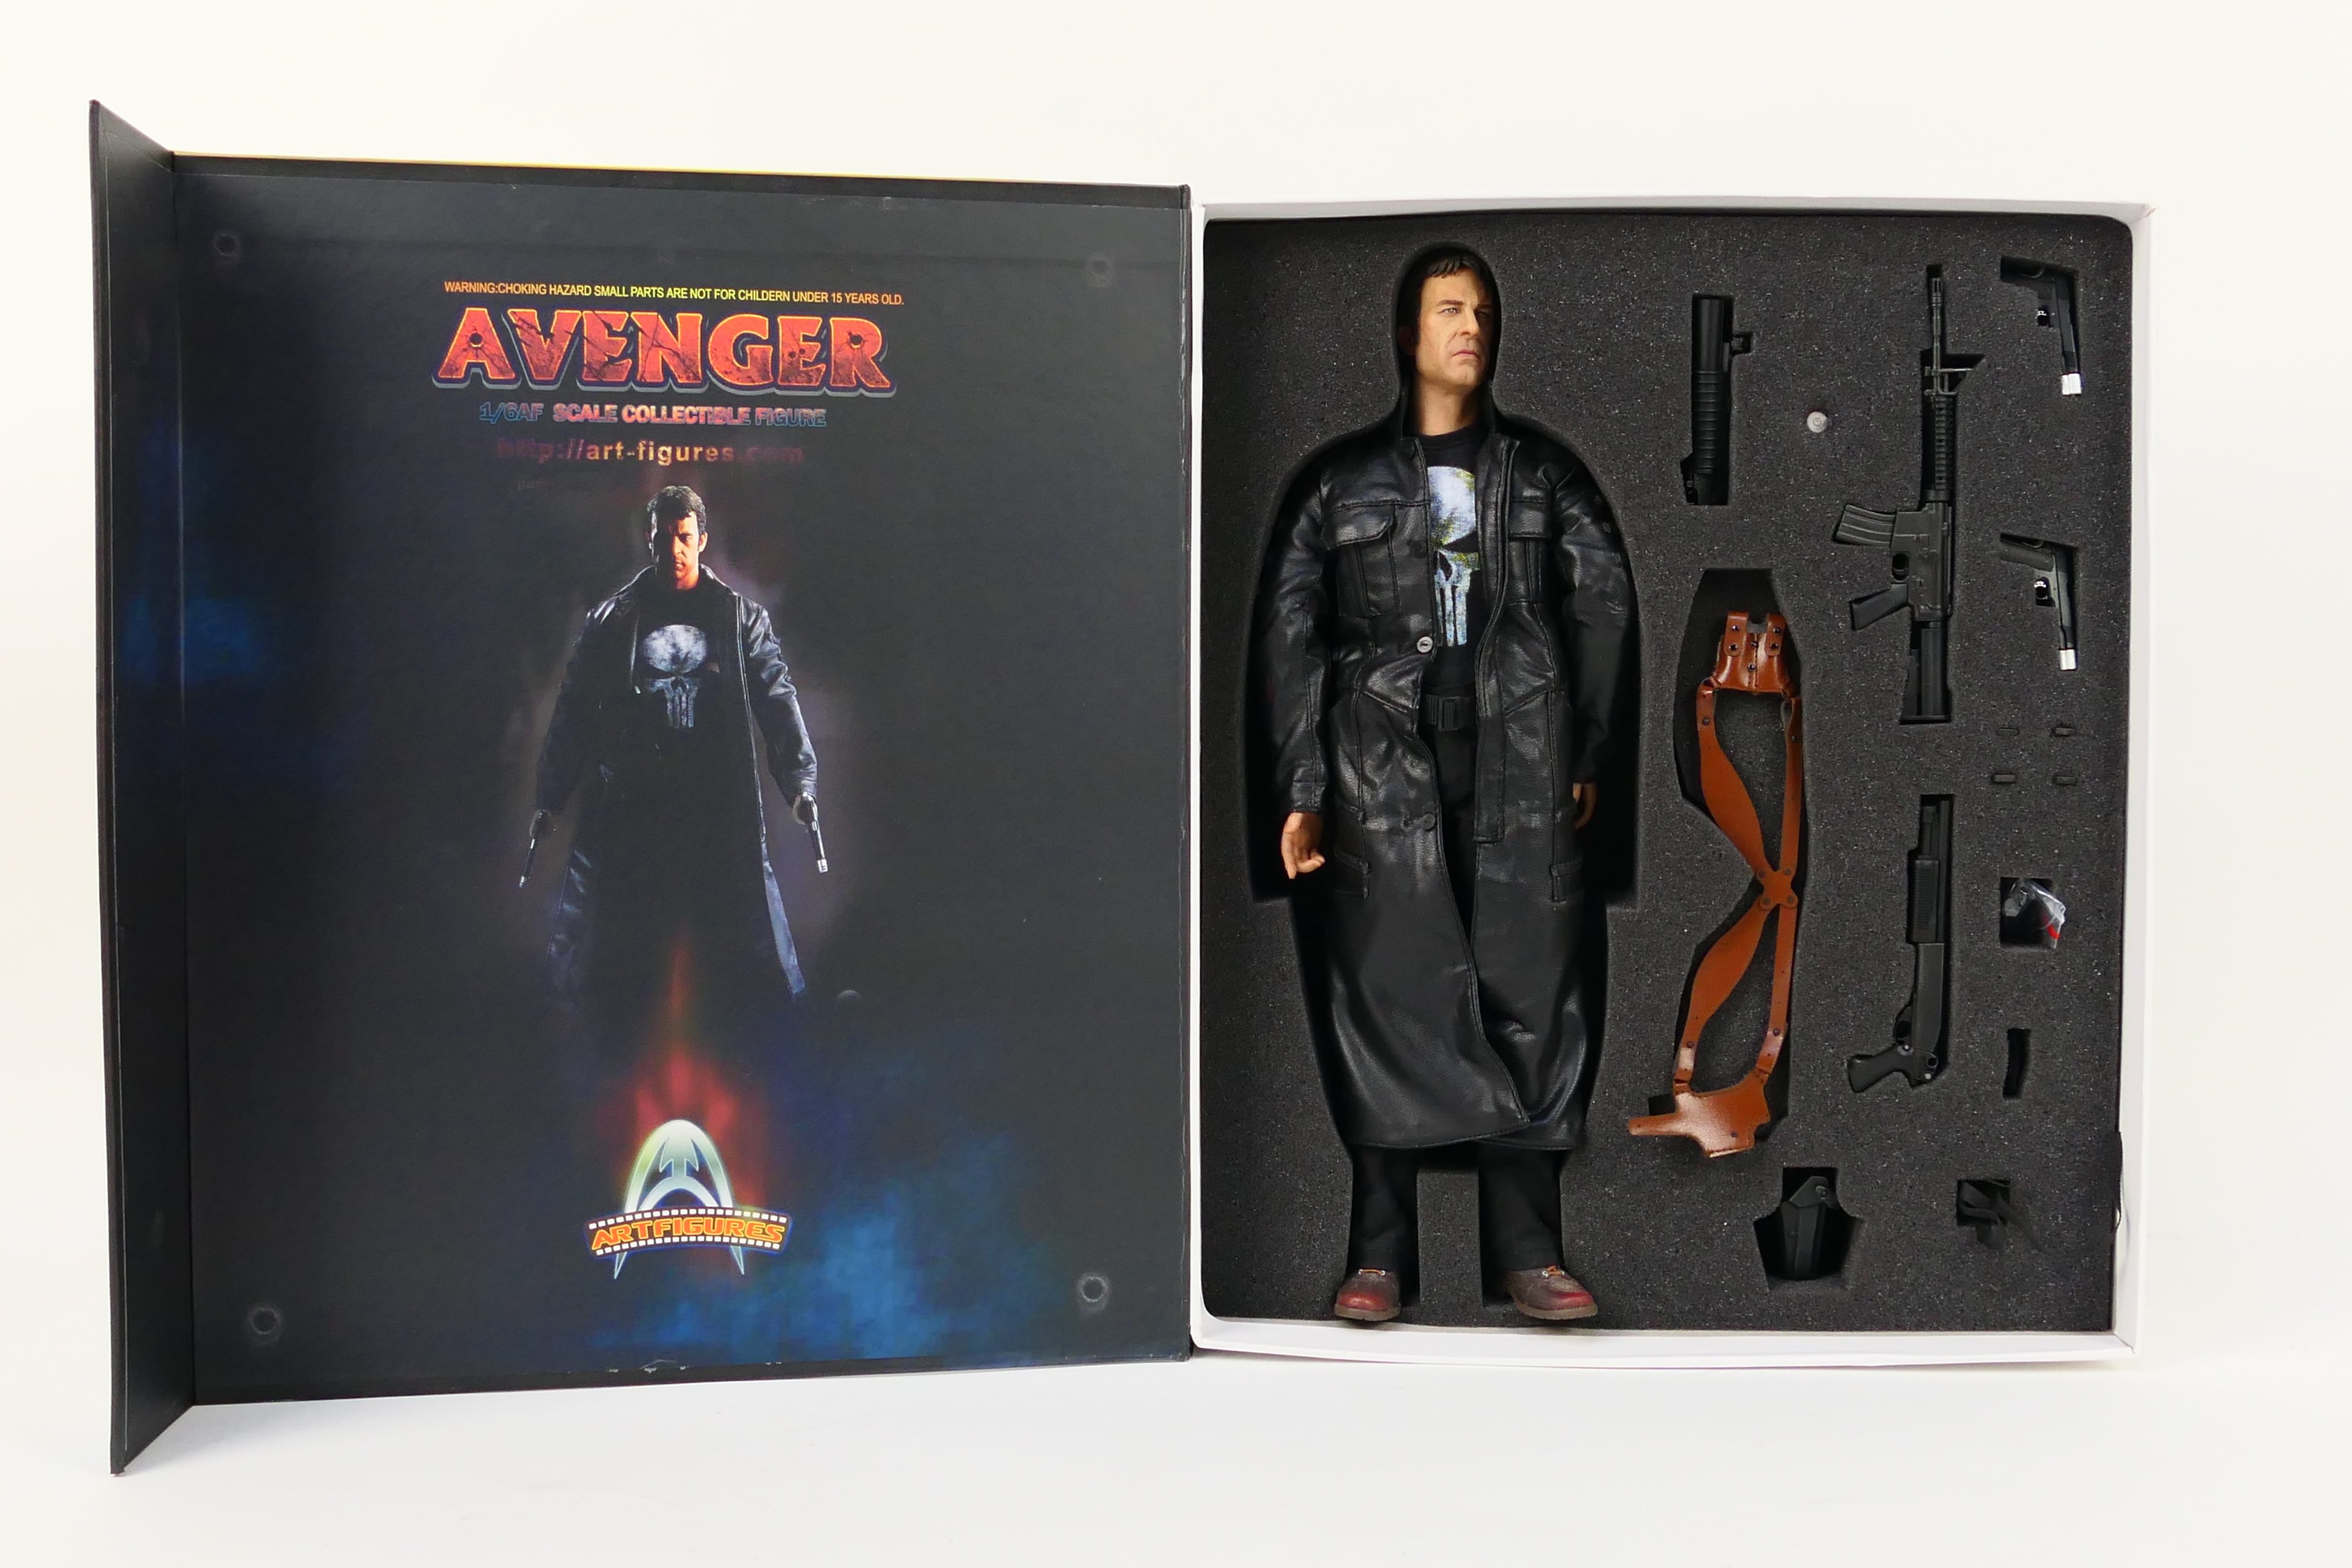 Art-figures - Avenger - A boxed 12 inch Frank Castle 1/6 scale figure with accessories # AF-005.